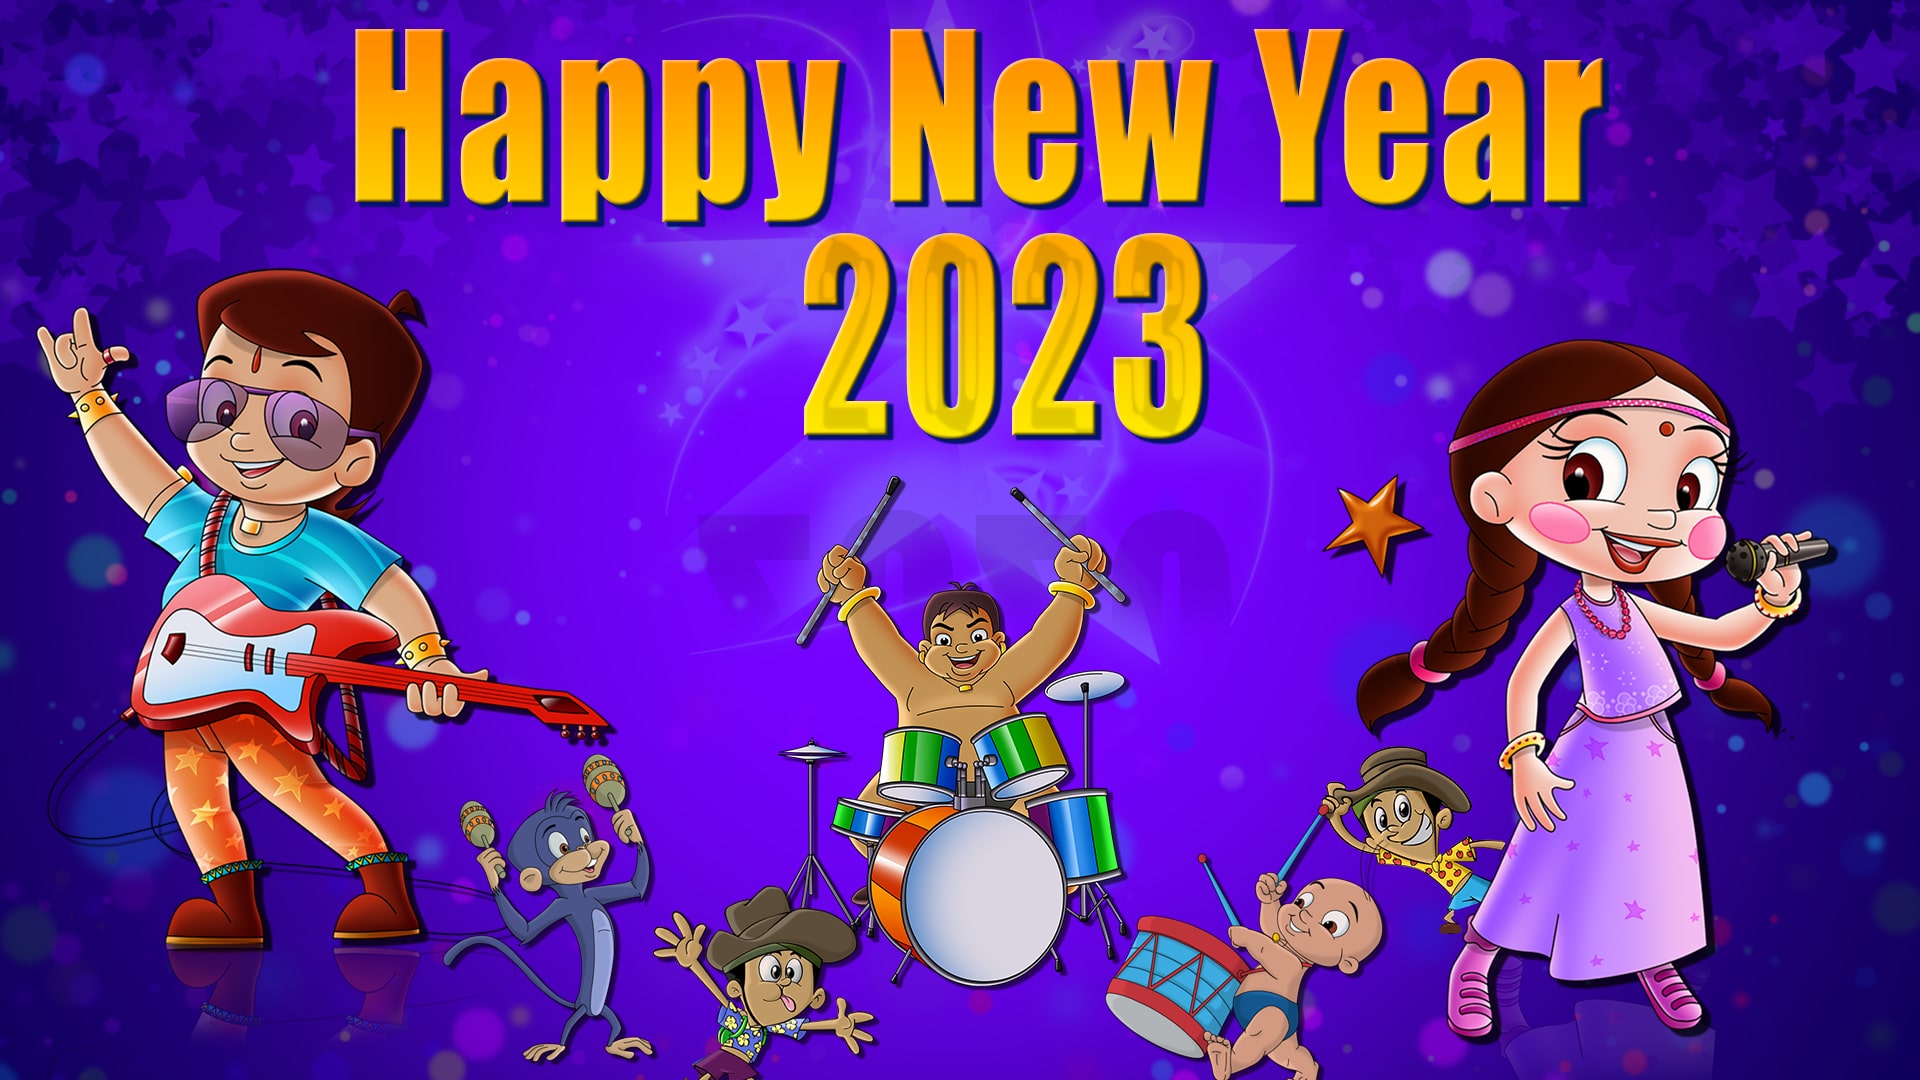 Happy New Year Wishes & Images for 2023 - New Year Images